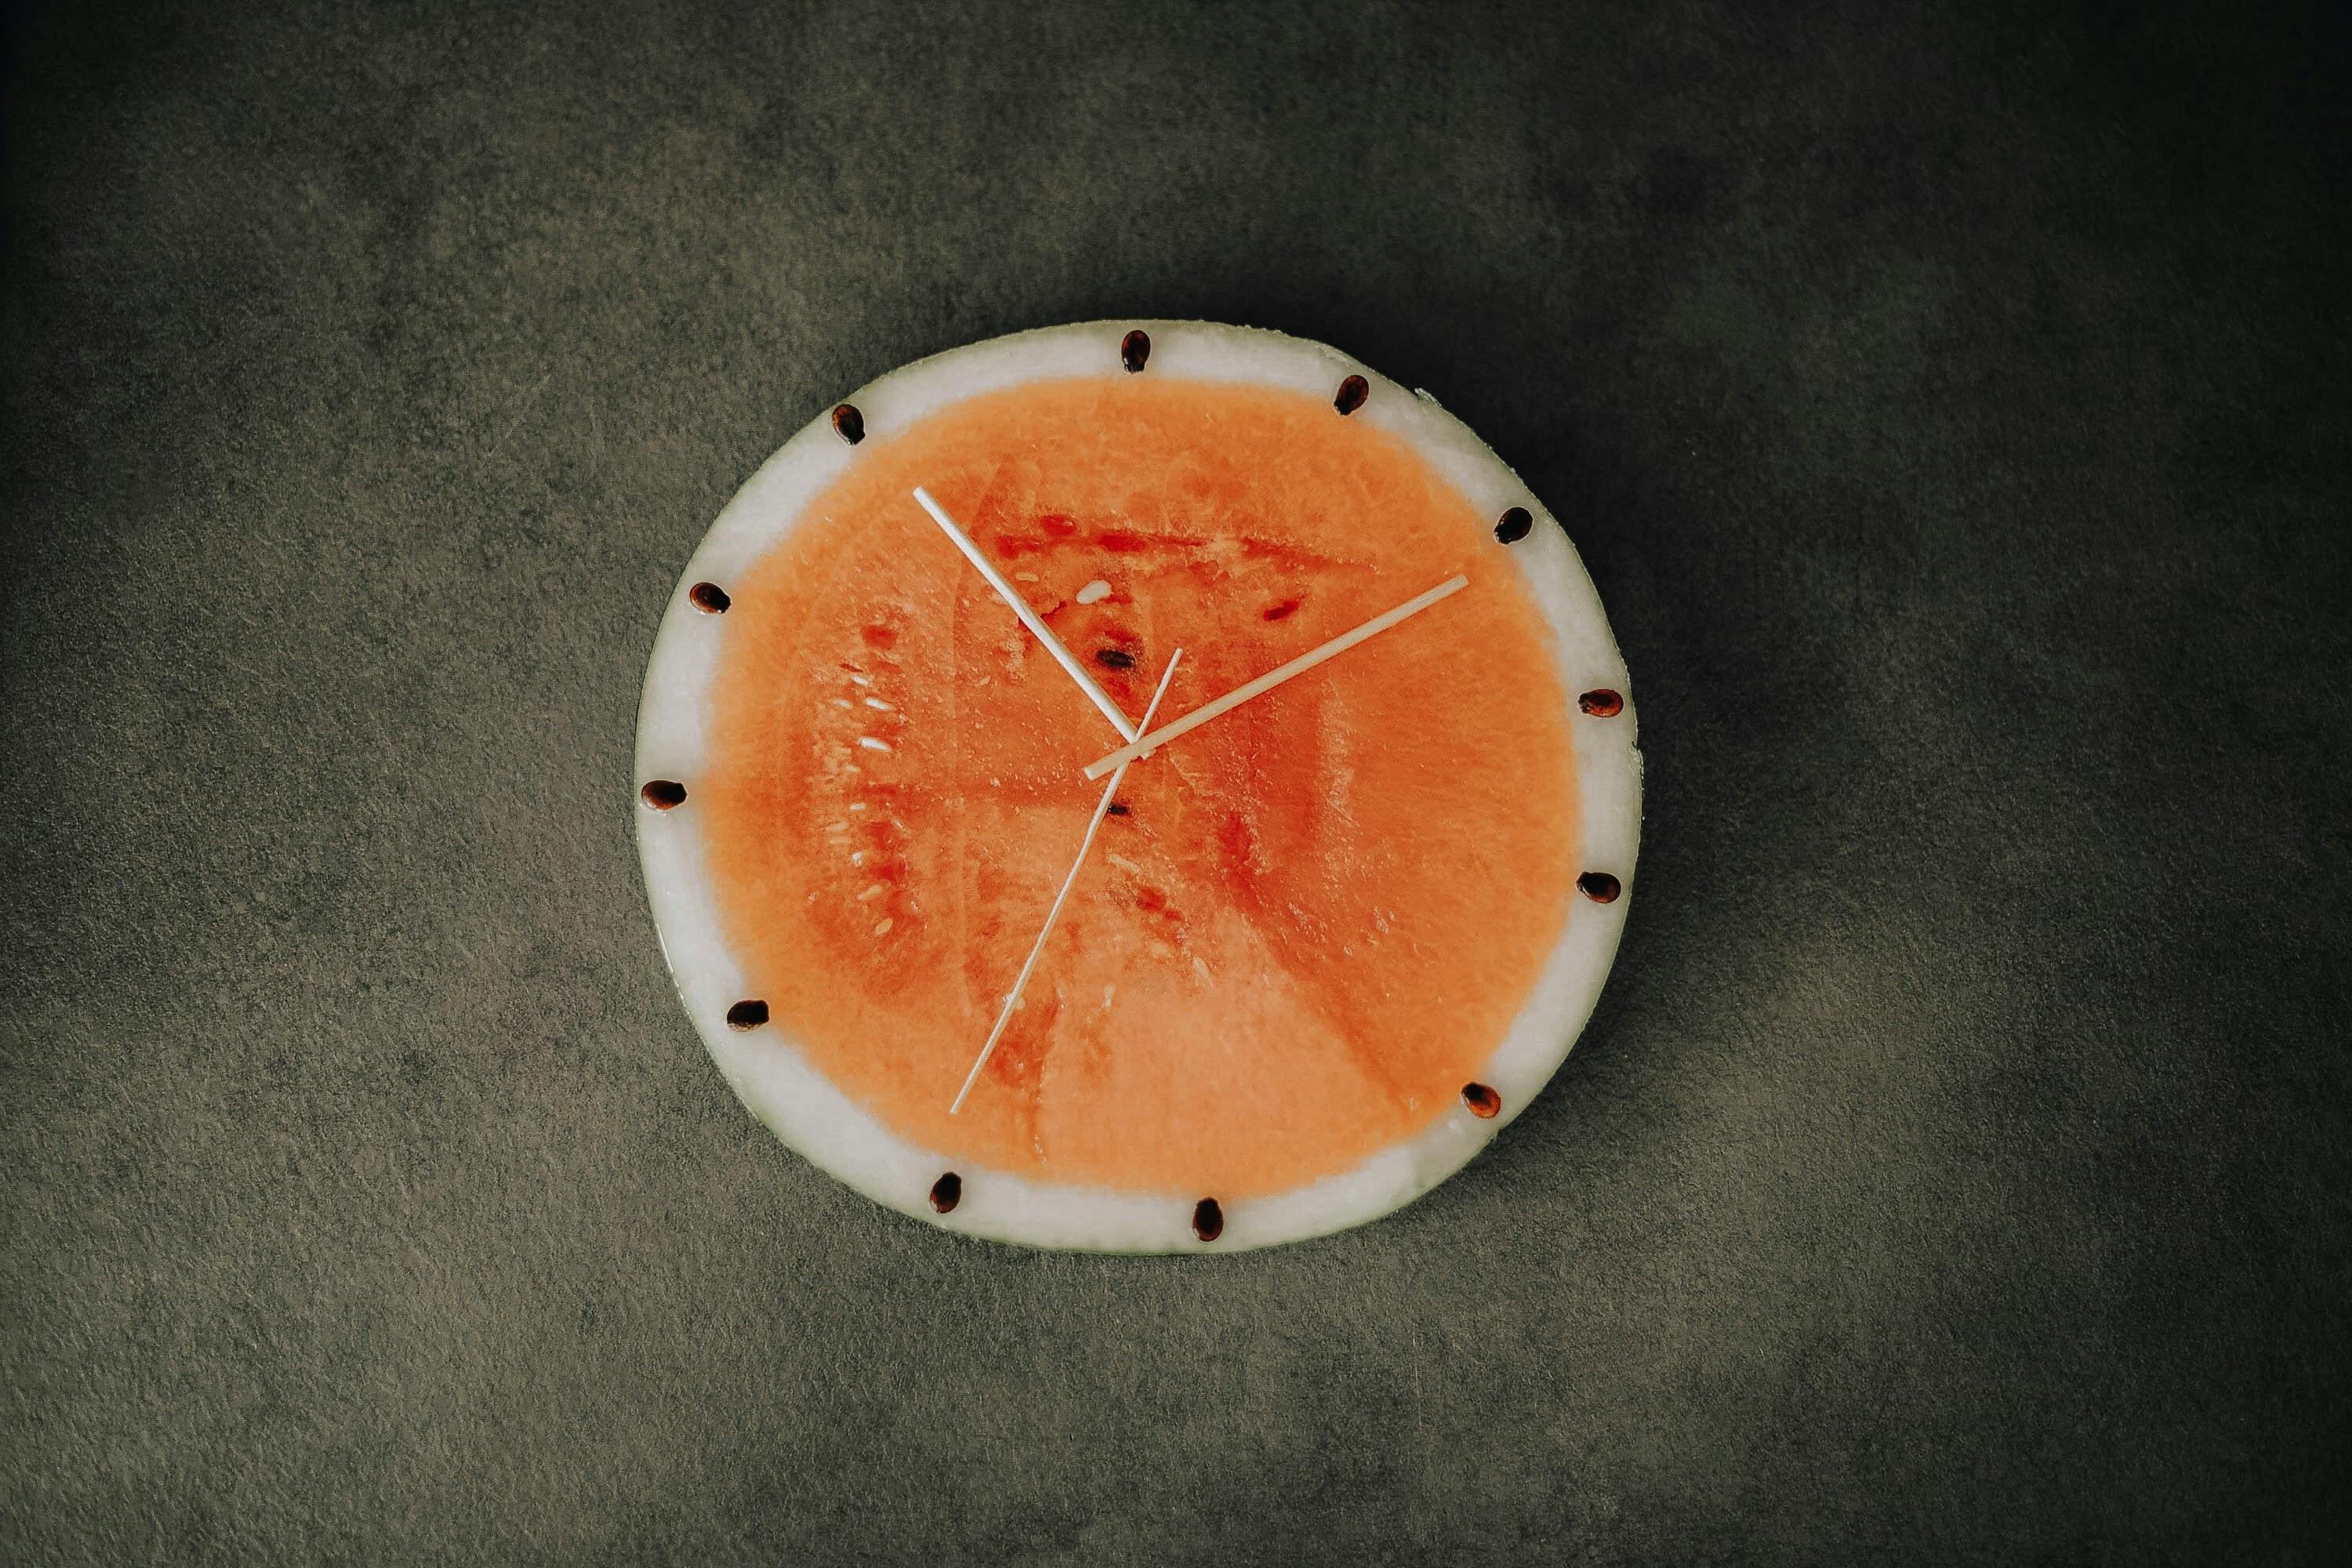 Clock made from watermelon and wooden sticks